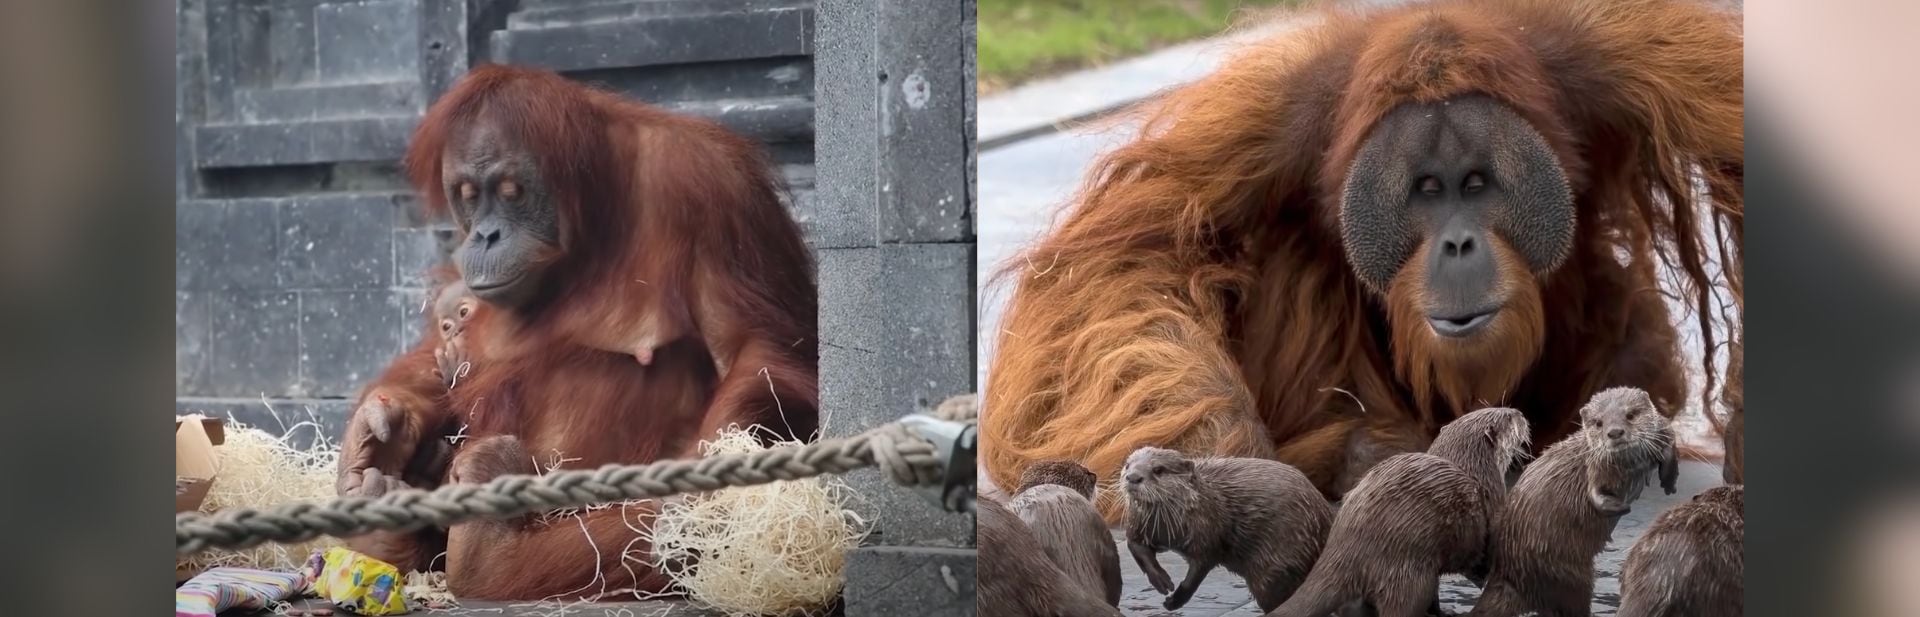 Lonely Orangutans Find Joy Again with These Squeaky Little Friends